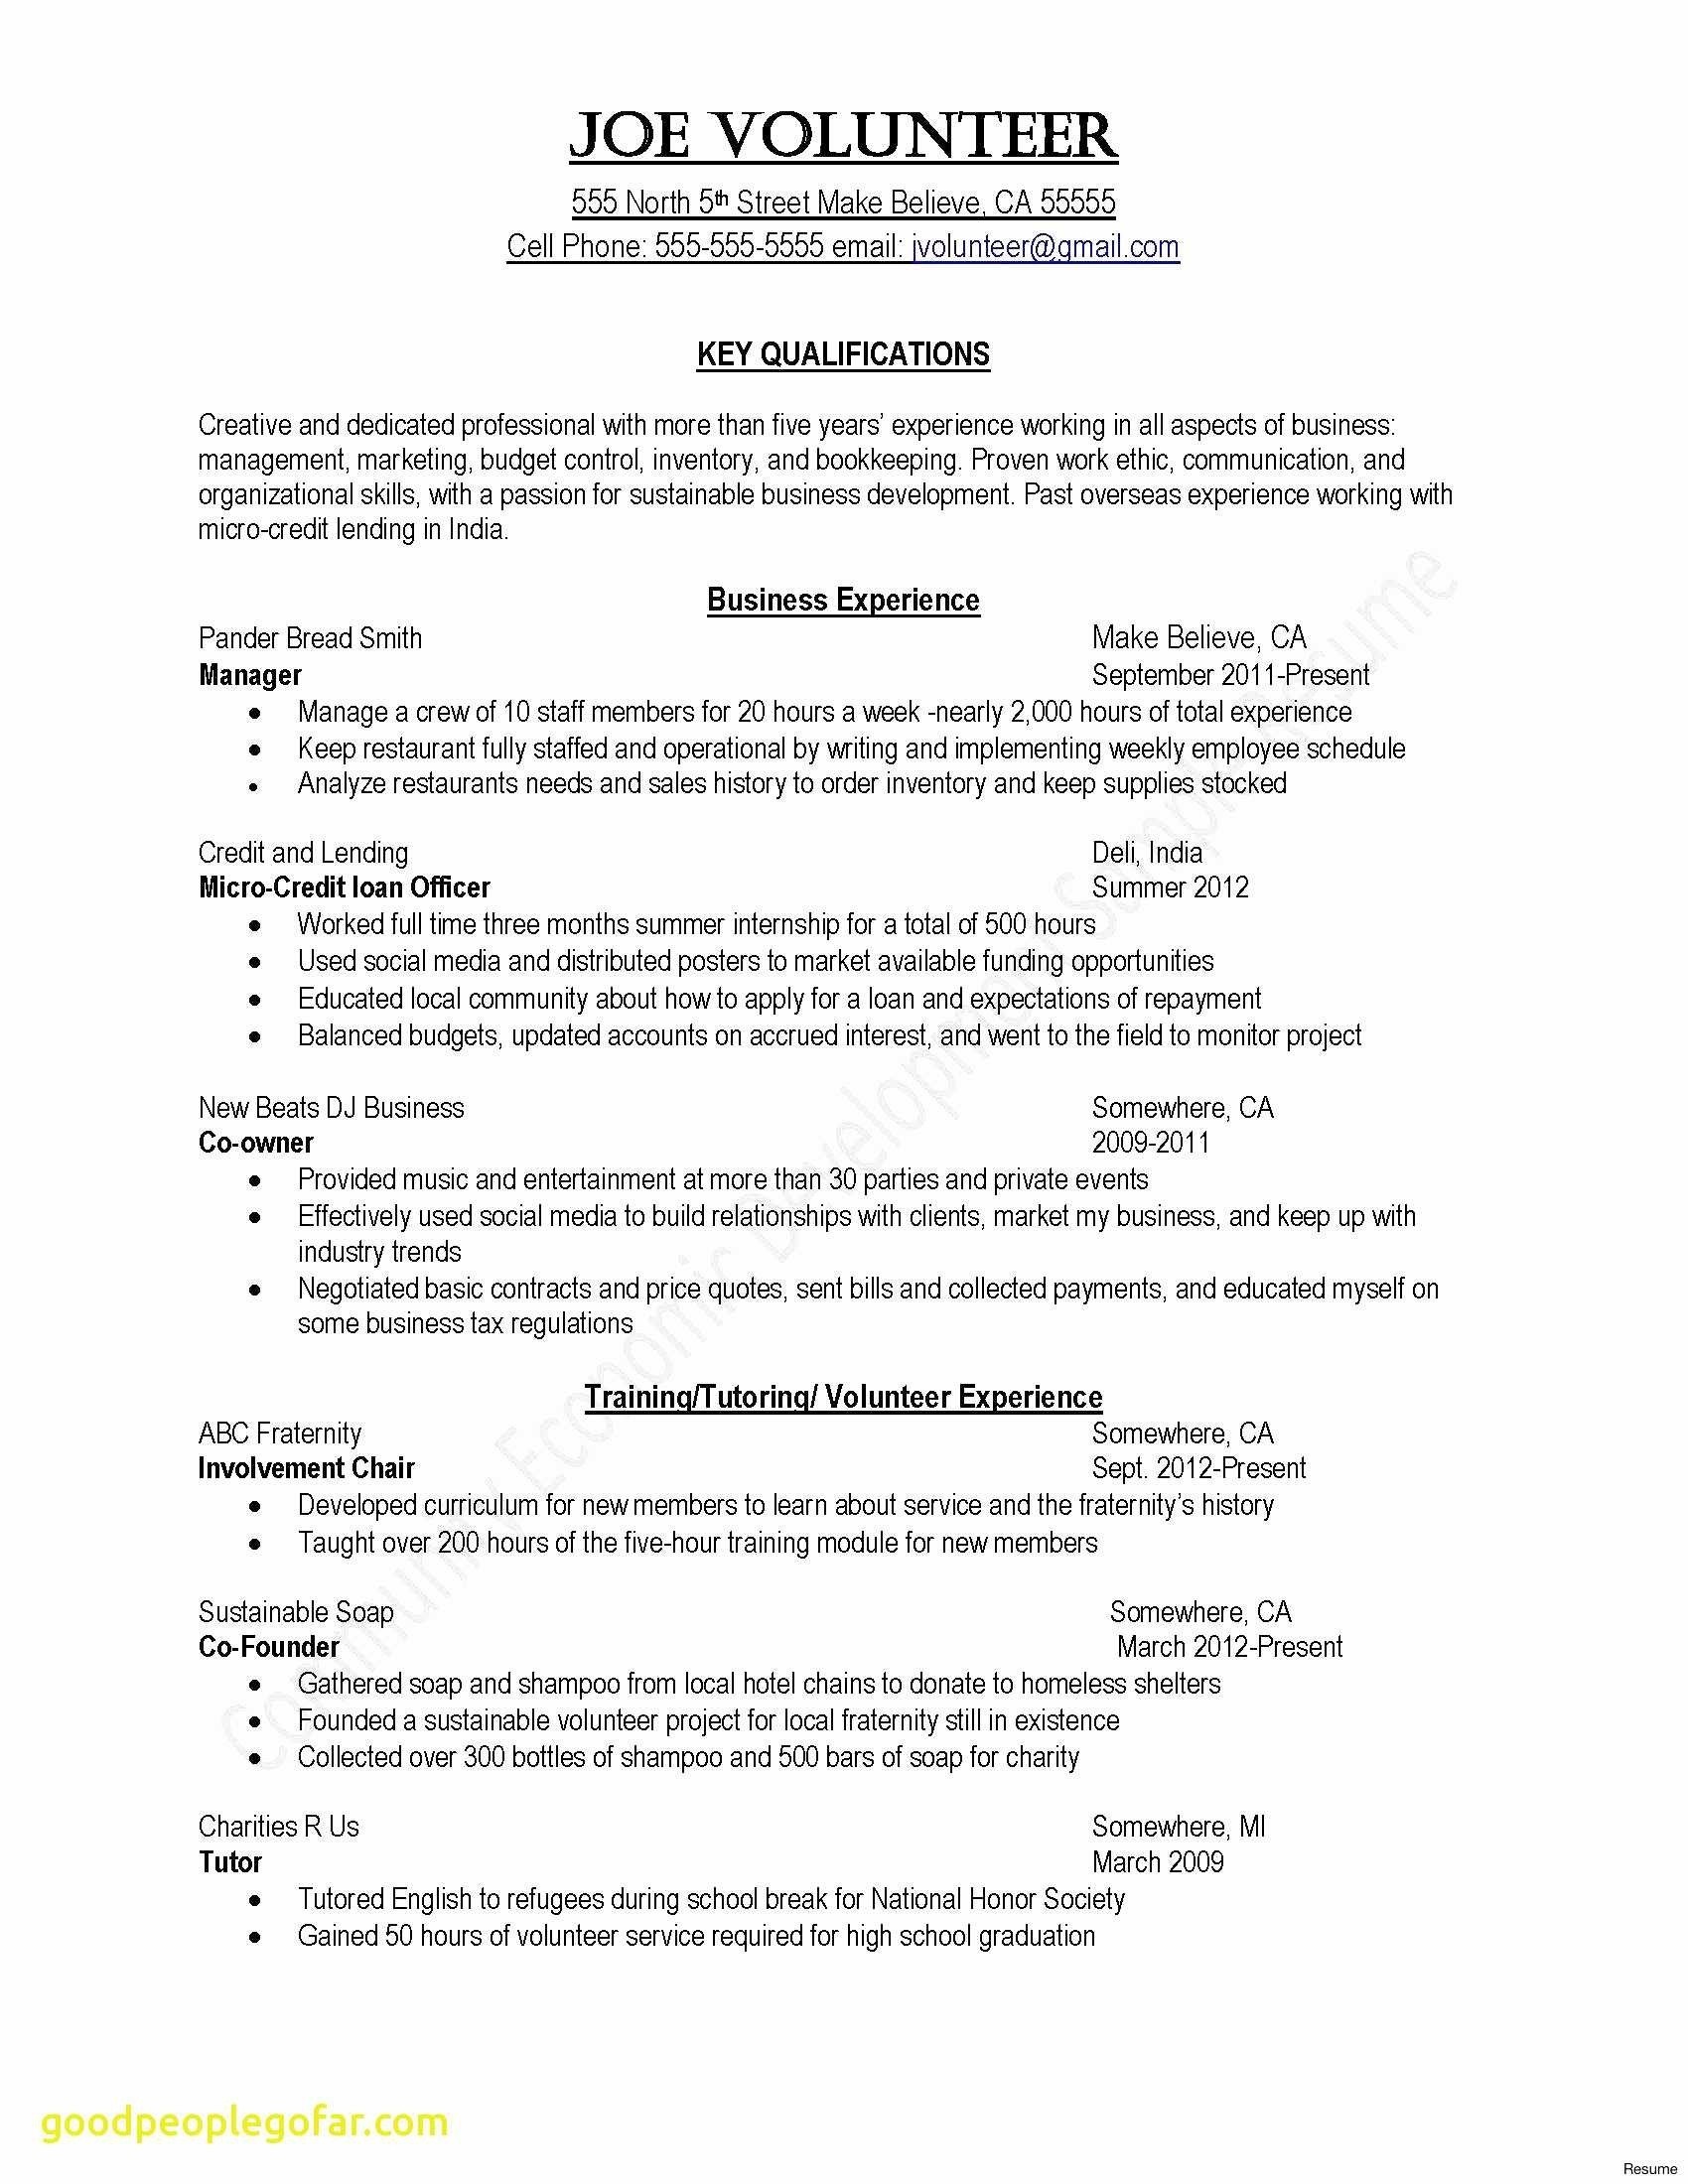 Basic Resume Examples Examples Of Good Cv Layout Cool Basic Resume Examples Lovely Best Sample College Application Resume Of Examples Of Good Cv Layout basic resume examples|wikiresume.com